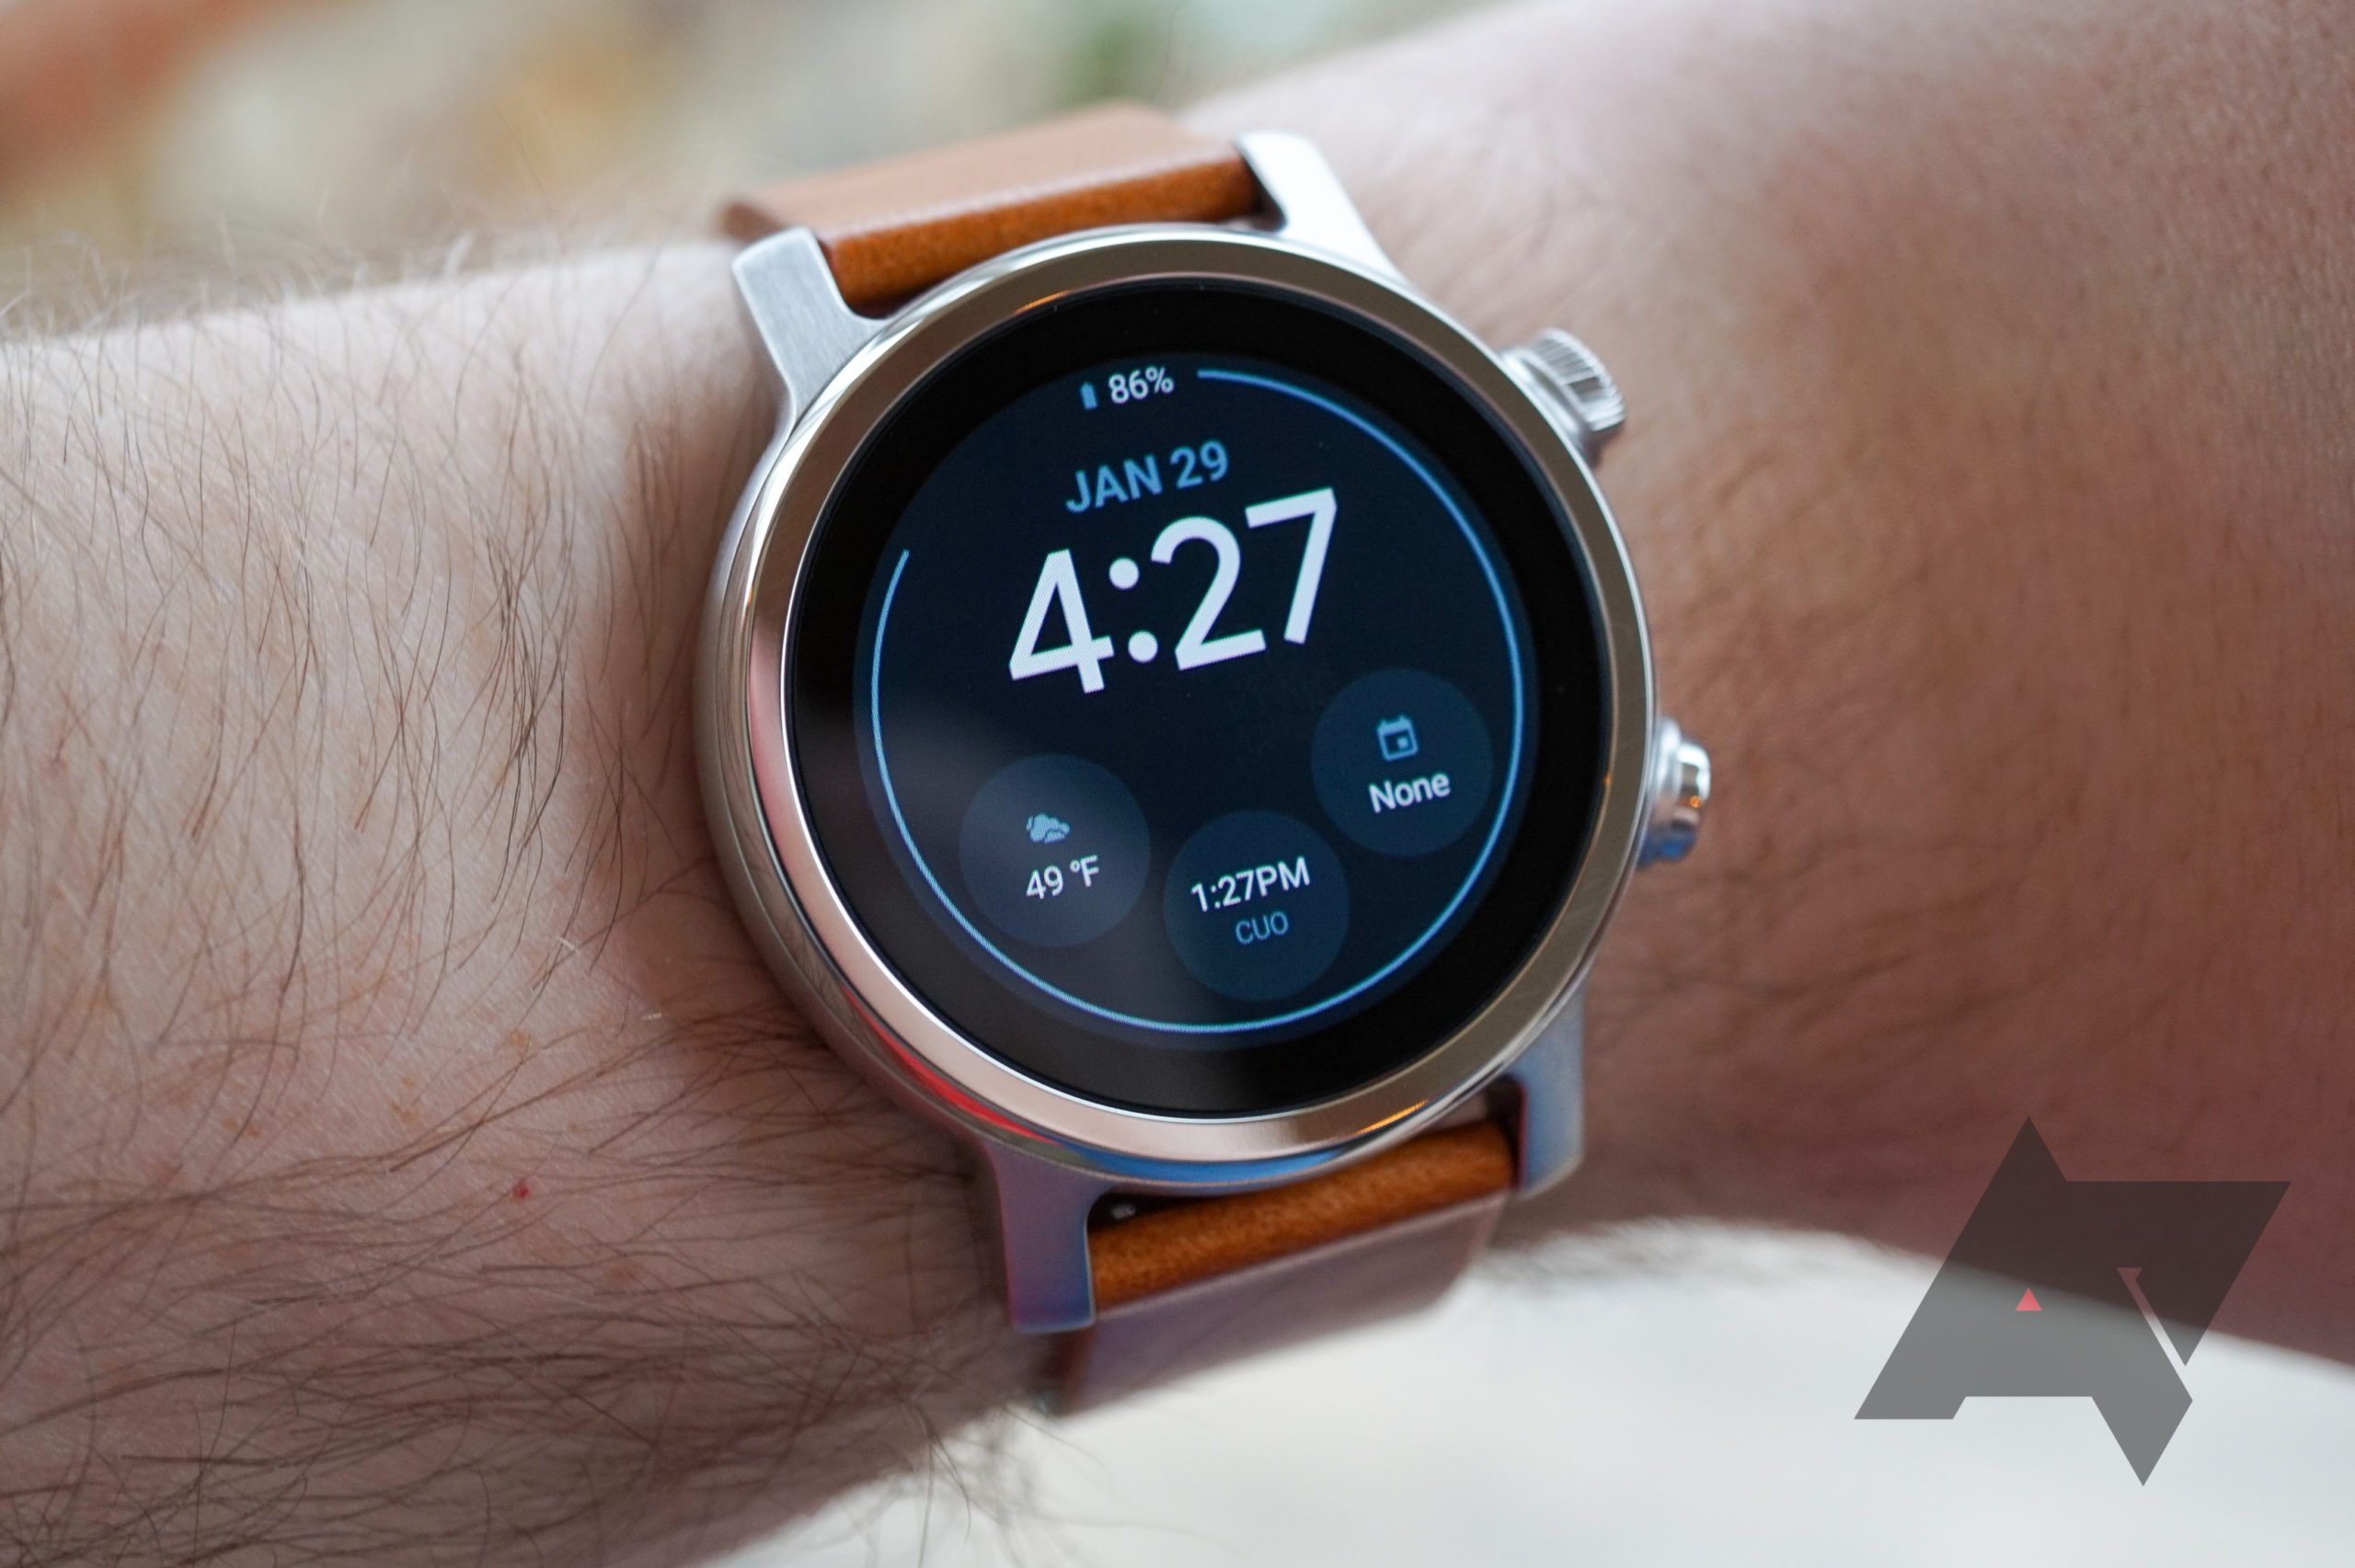 There's a new Motorola smartwatch coming in 2022,' but bigger questions